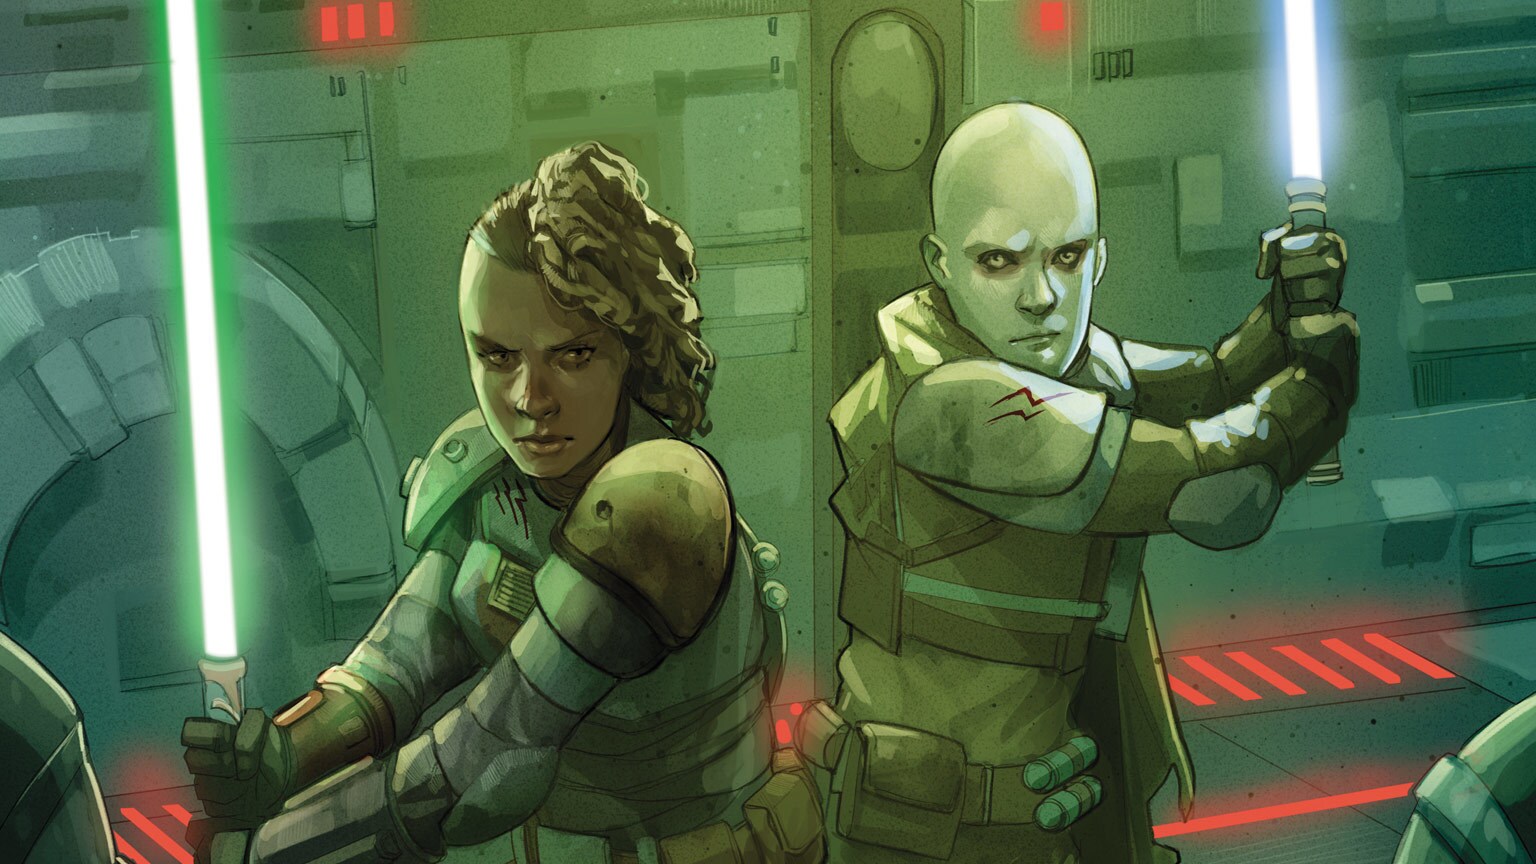 A Dangerous Game is Afoot in Marvel's Star Wars: The High Republic #10 - Exclusive Preview